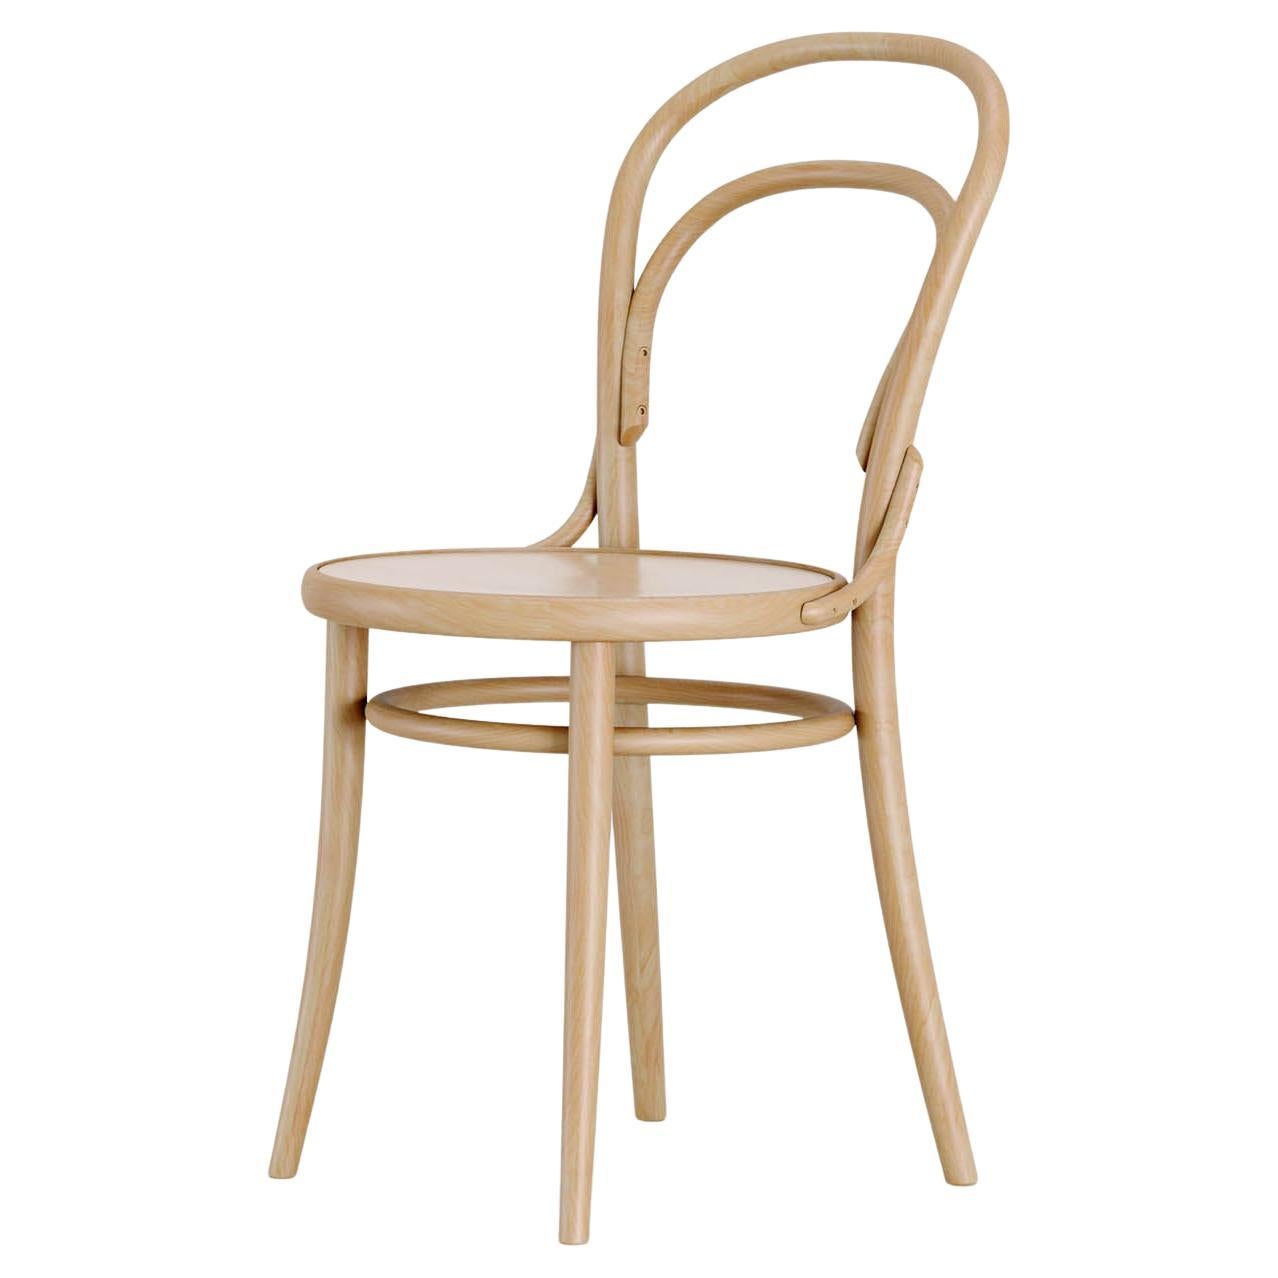 Contemporary Bistro Chair No. 14 by TON, Light Beech